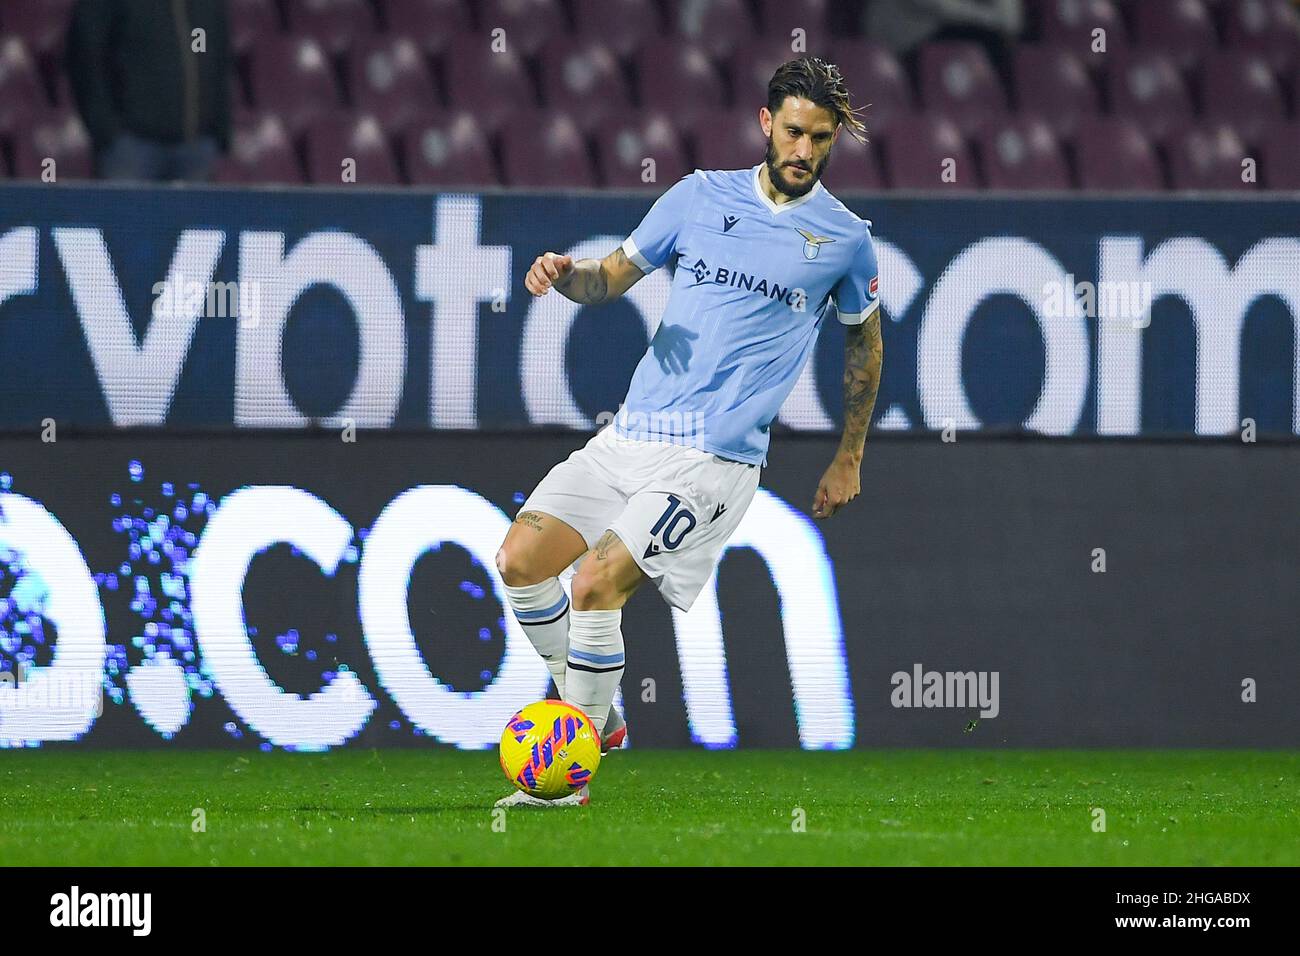 SALERNO, ITALY - JANUARY 15:  Luis Alberto of SS Lazio in action during the Serie A match between US Salernitana and SS Lazio at Stadio Arechi on Janu Stock Photo